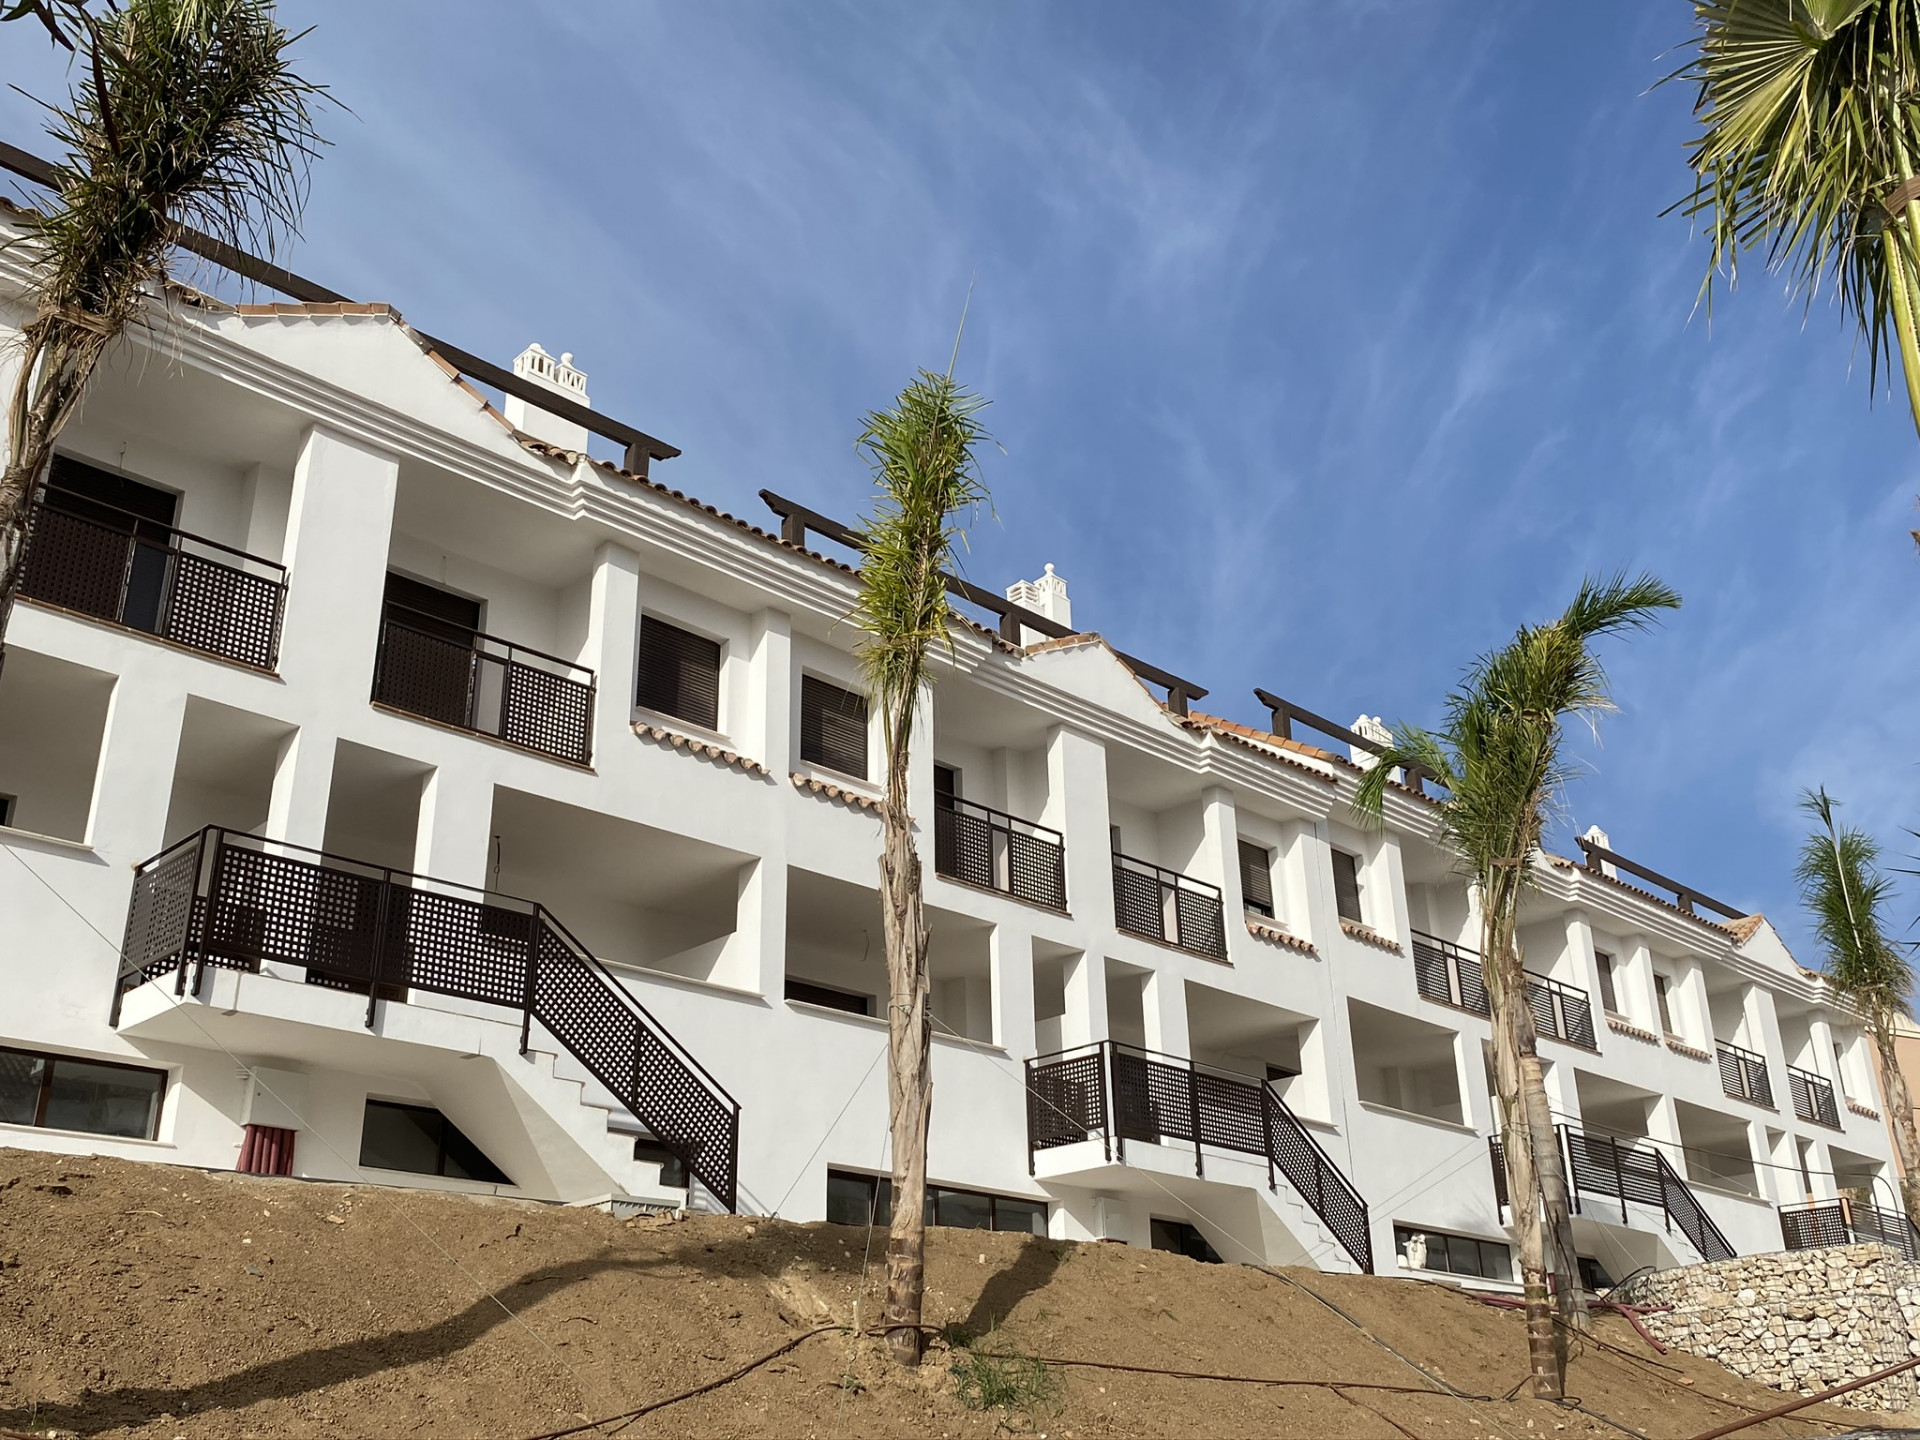 Complex of townhouses for sale in Riviera del Sol